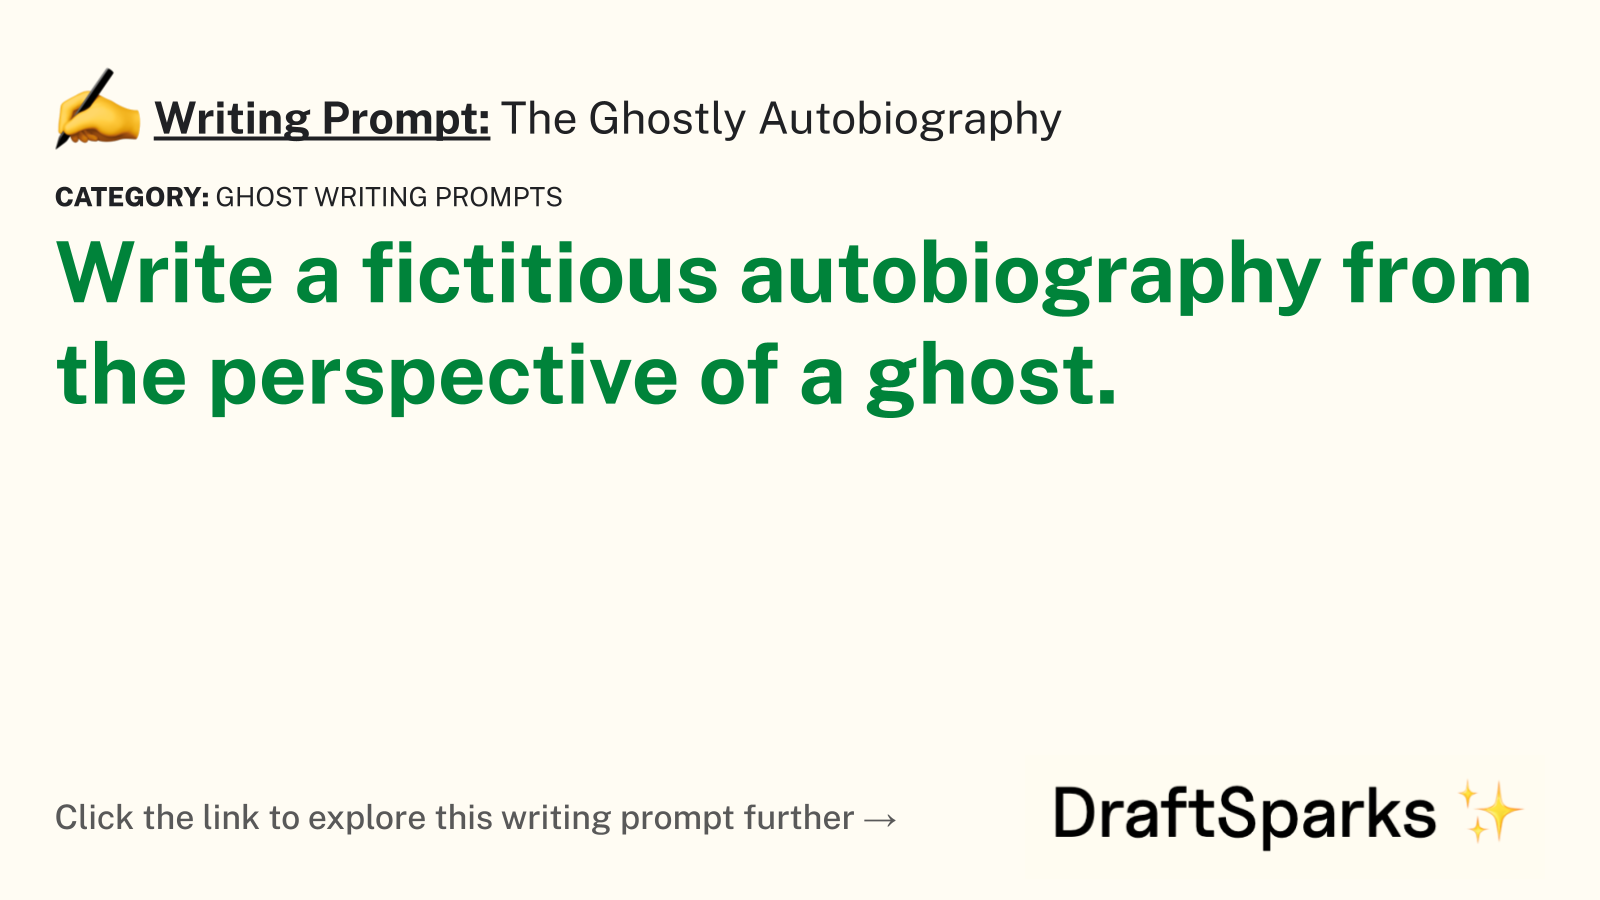 The Ghostly Autobiography